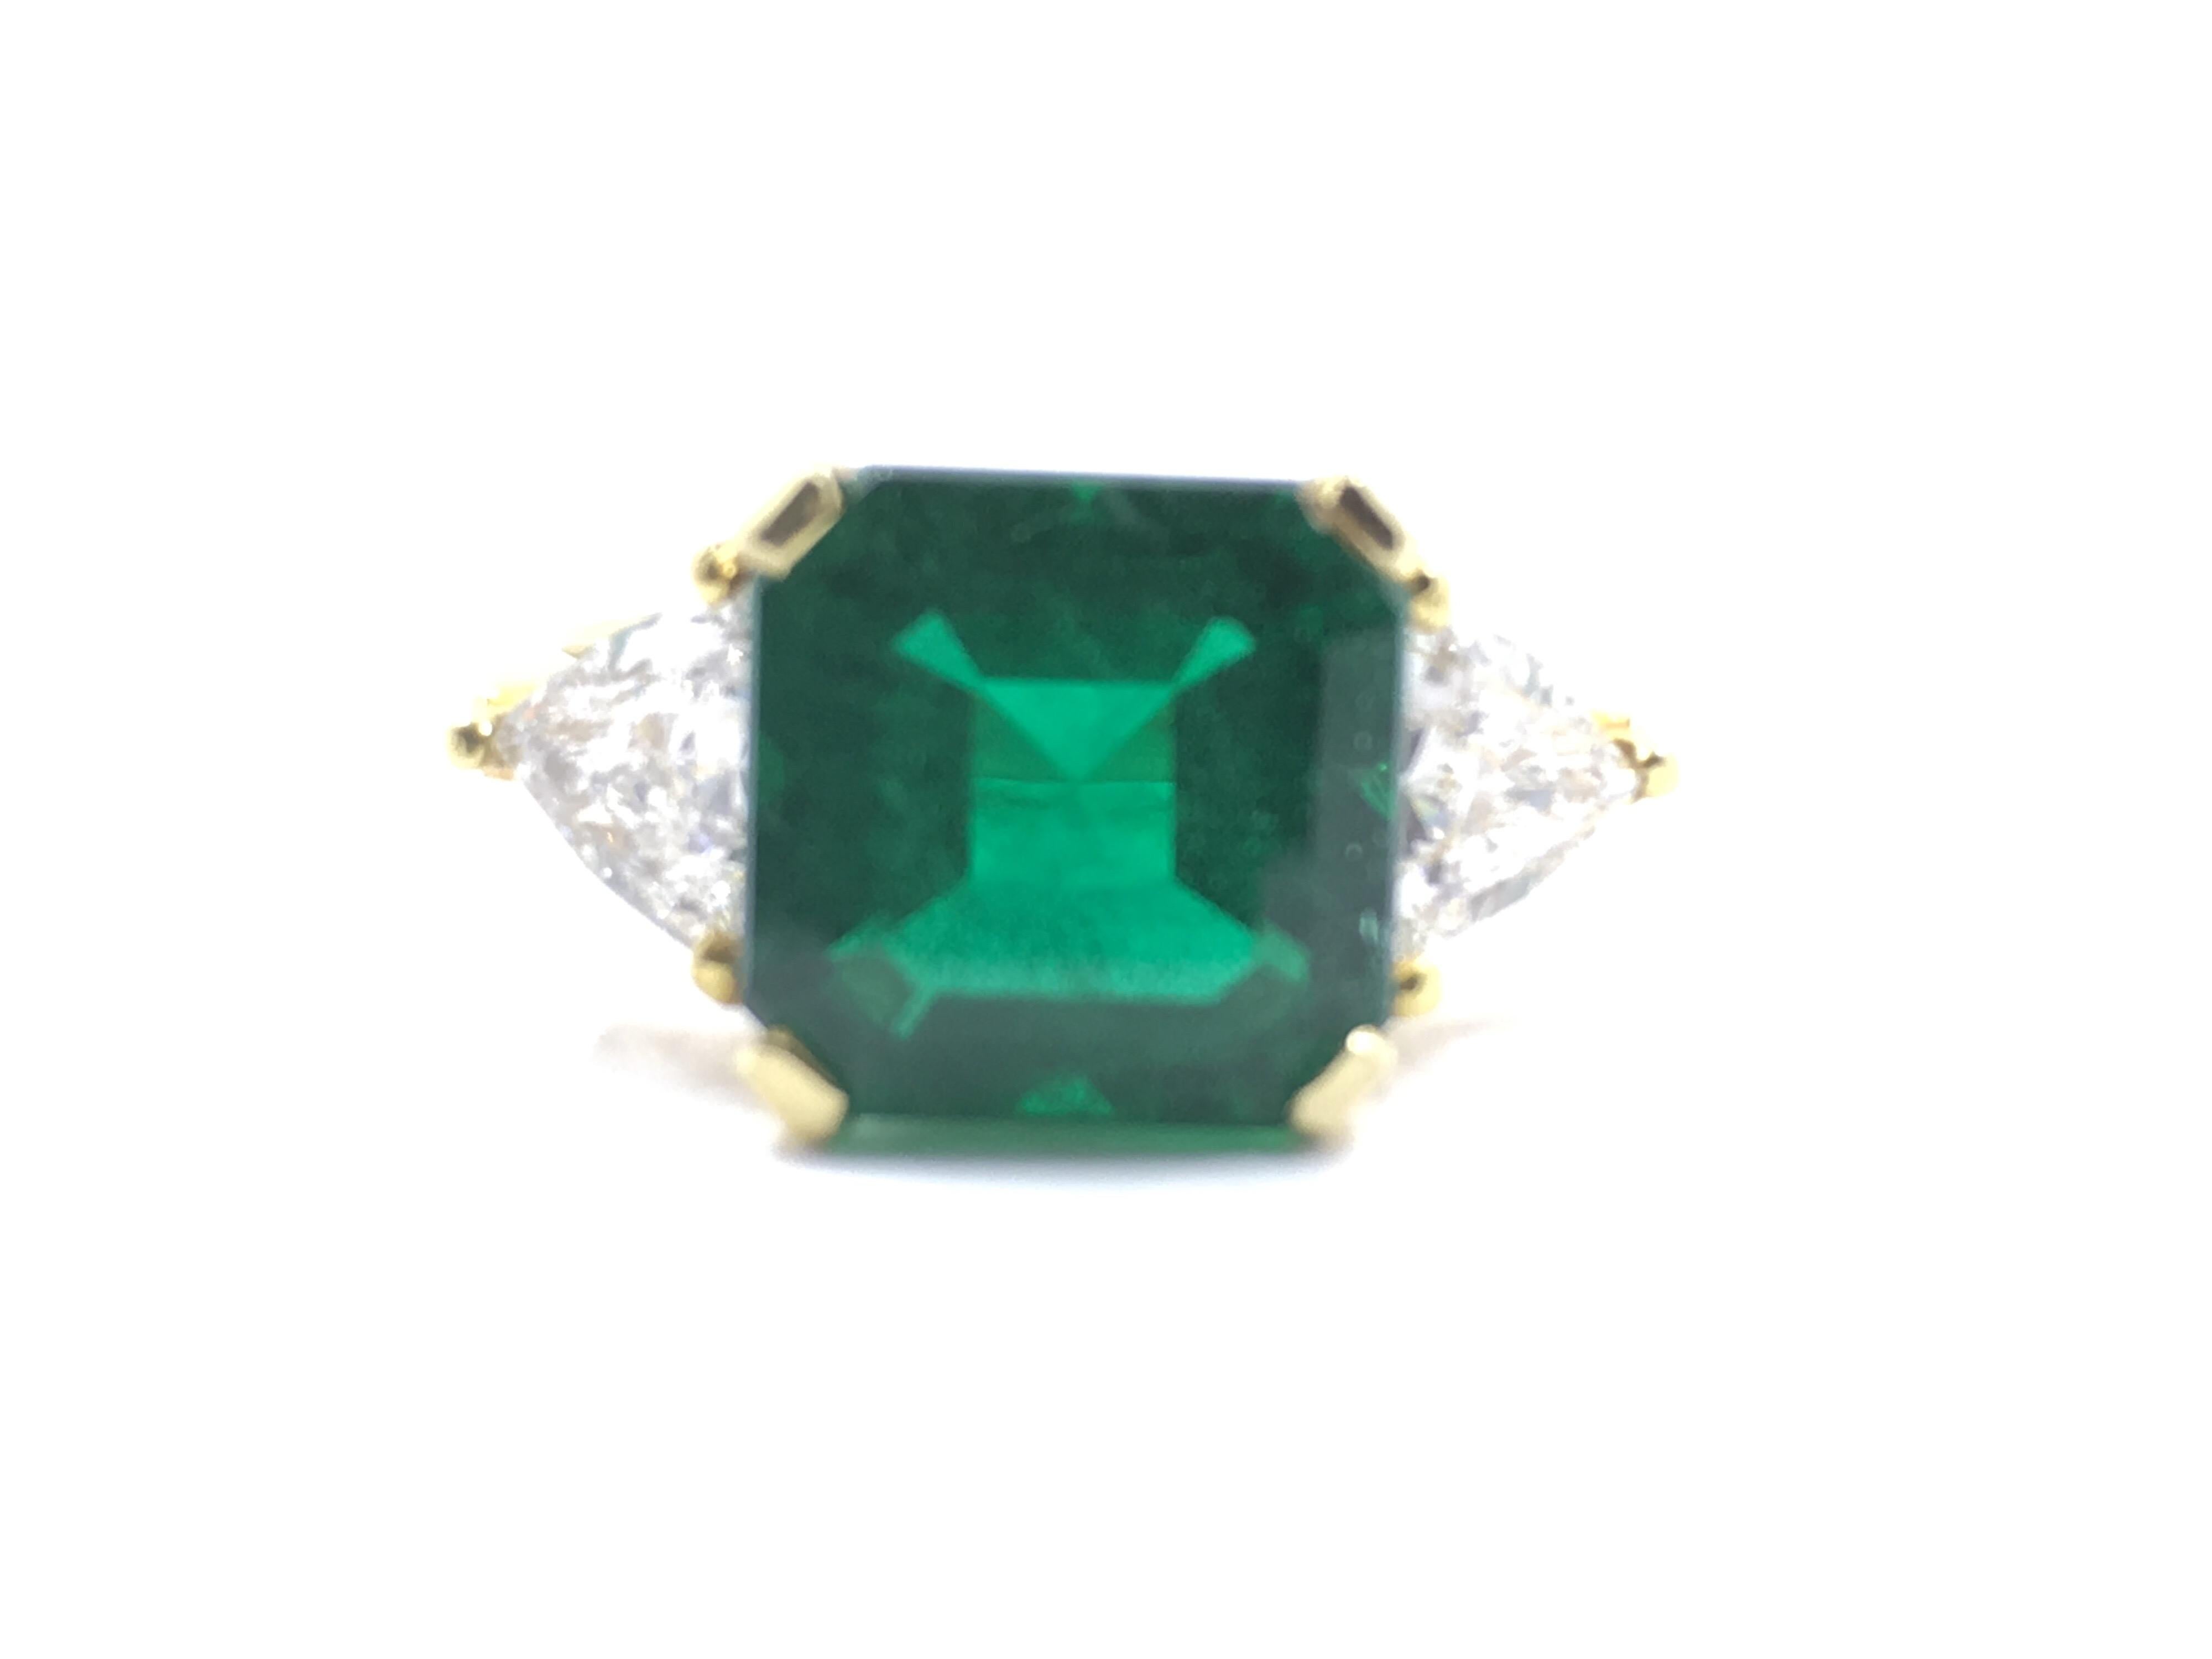 Colombian Emerald 4.67ct
2 Trillion Diamonds  E VS1 1.09ct total weight
18Kt Yellow Gold